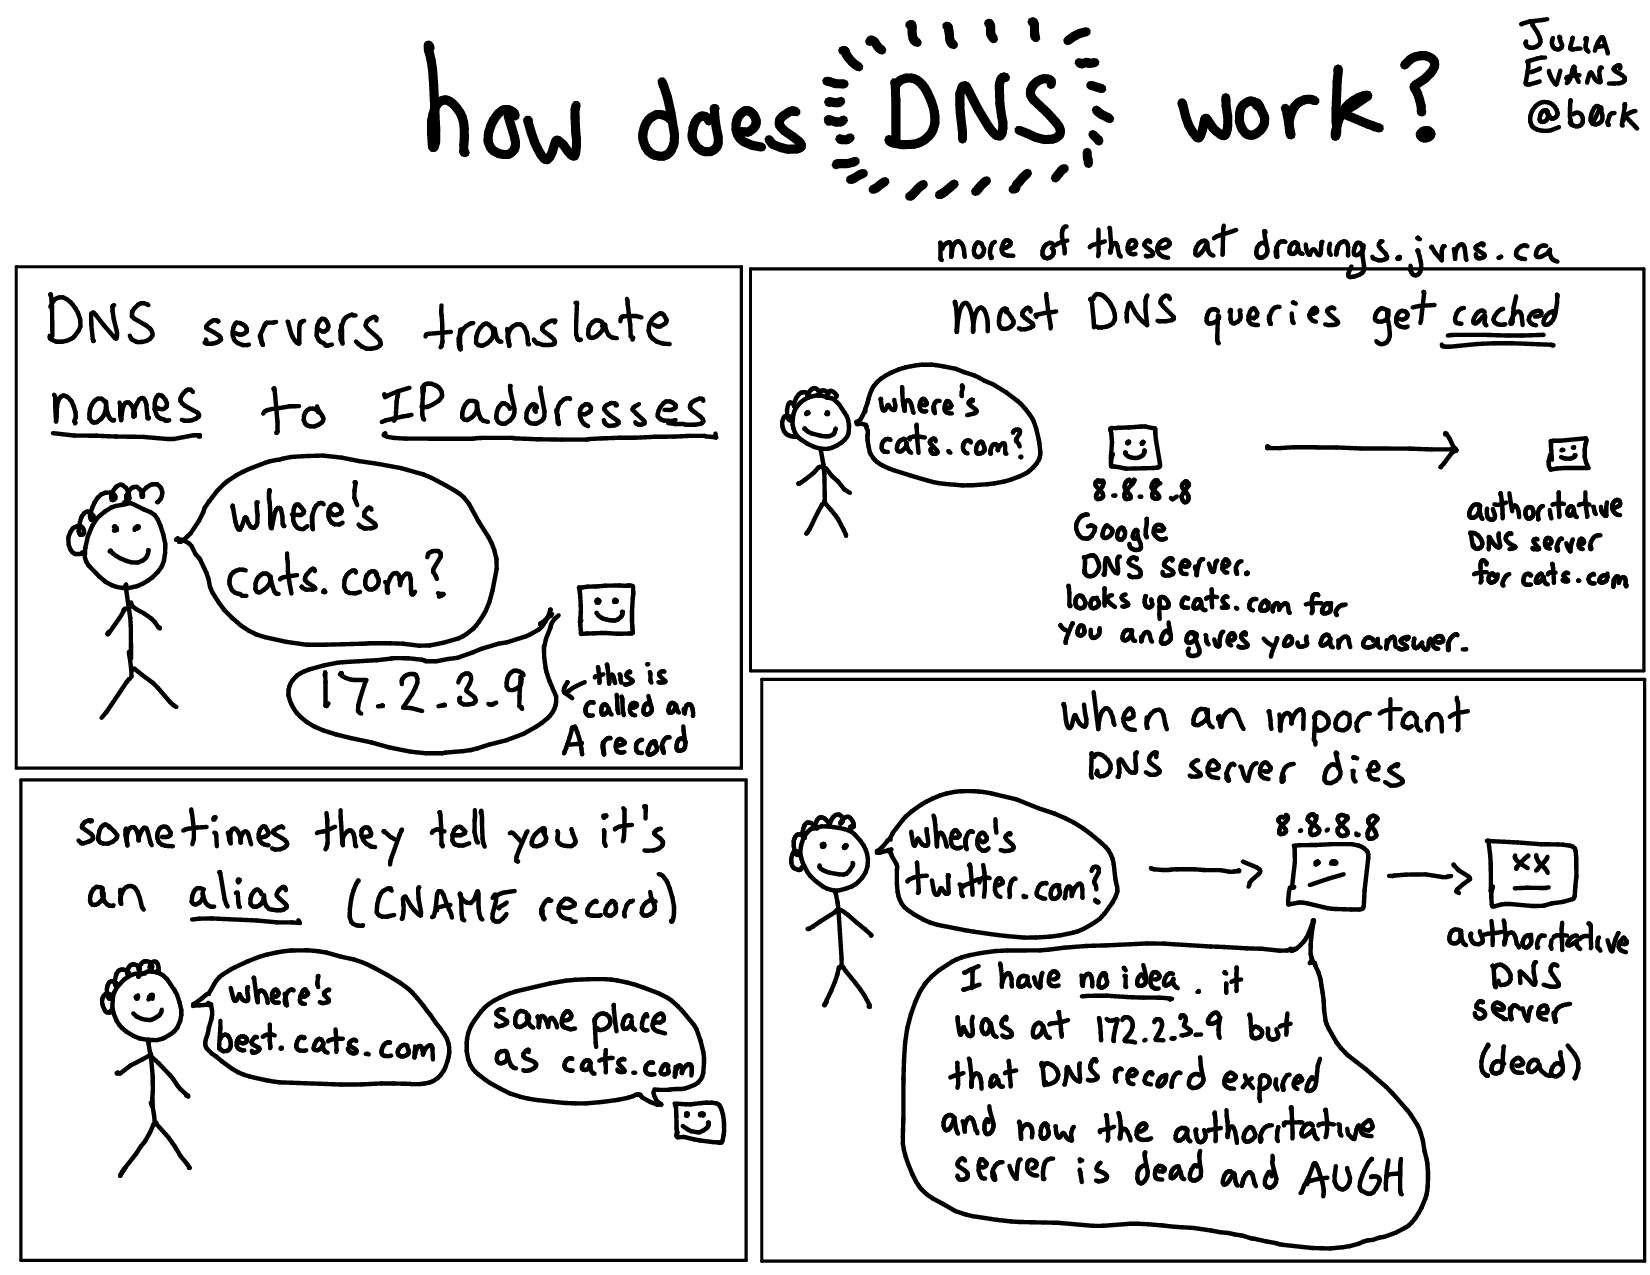 How DNS works explained by Julia Evans